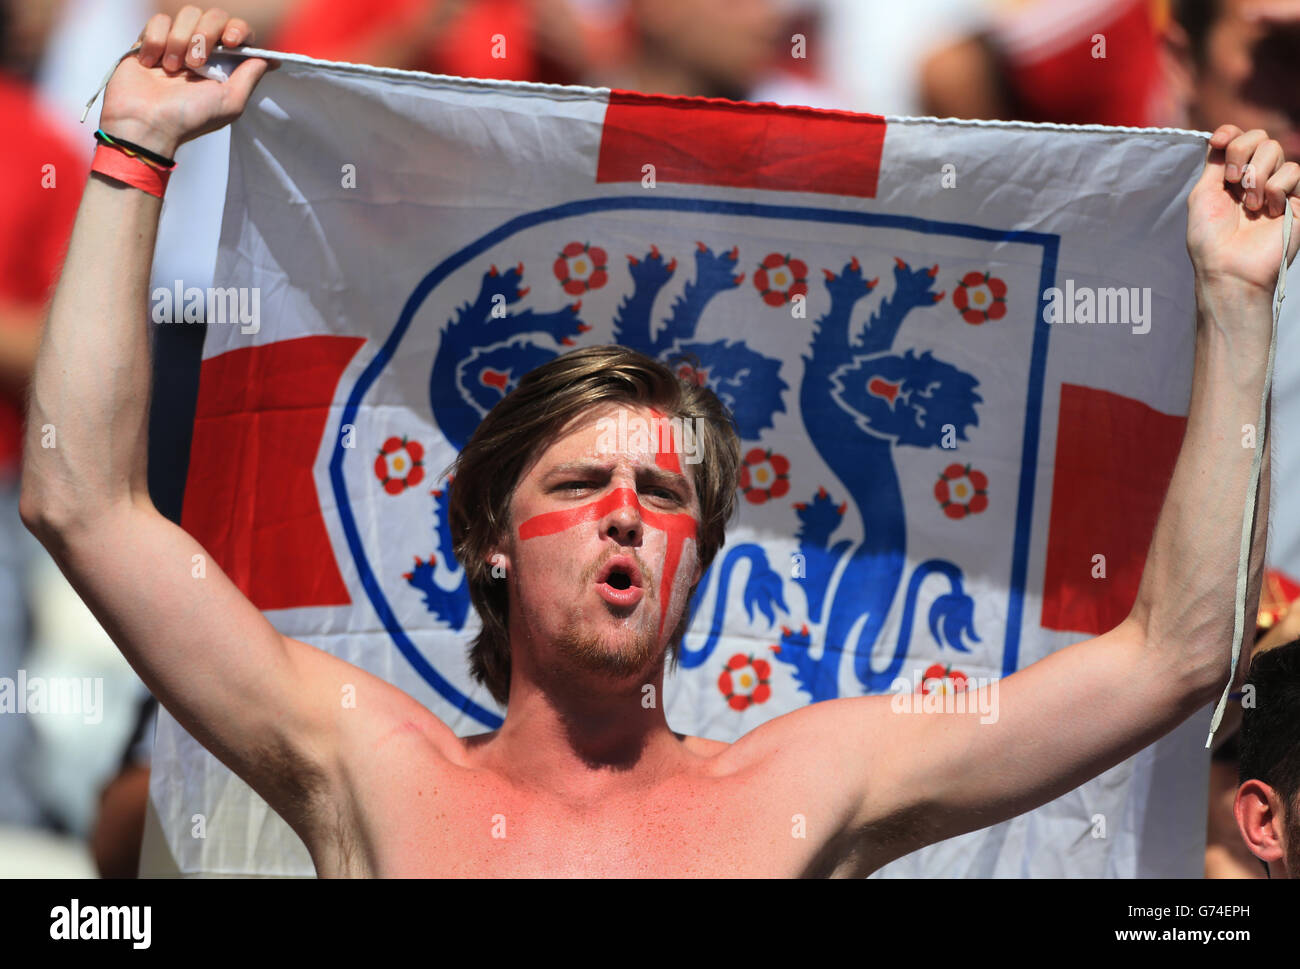 An England fan reacts during the announcement of the Costa Rica team prior to kick off of the FIFA World Cup, Group D match at the Estadio Mineirao, Belo Horizonte, Brazil. Stock Photo